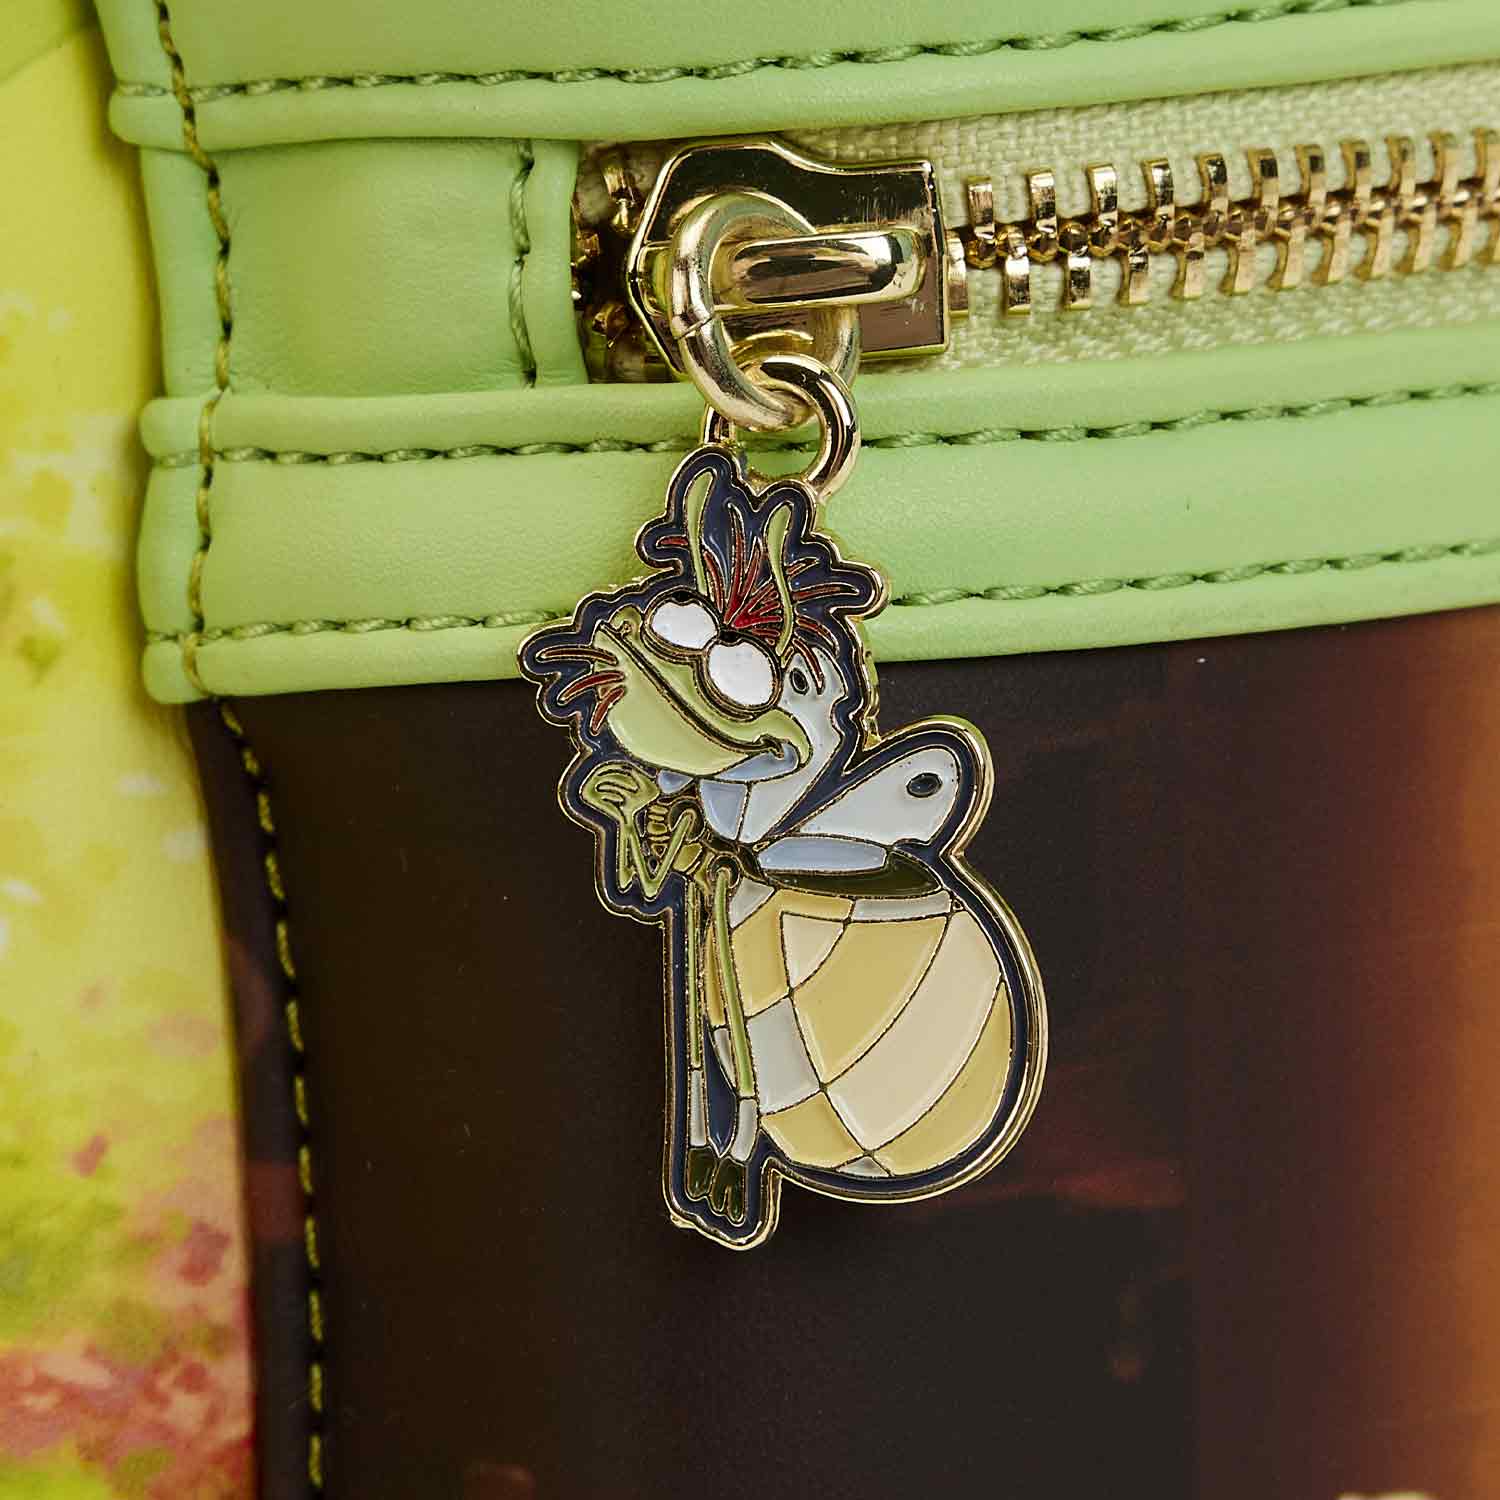 Loungefly x Disney The Princess and The Frog Scenes Mini Backpack - GeekCore